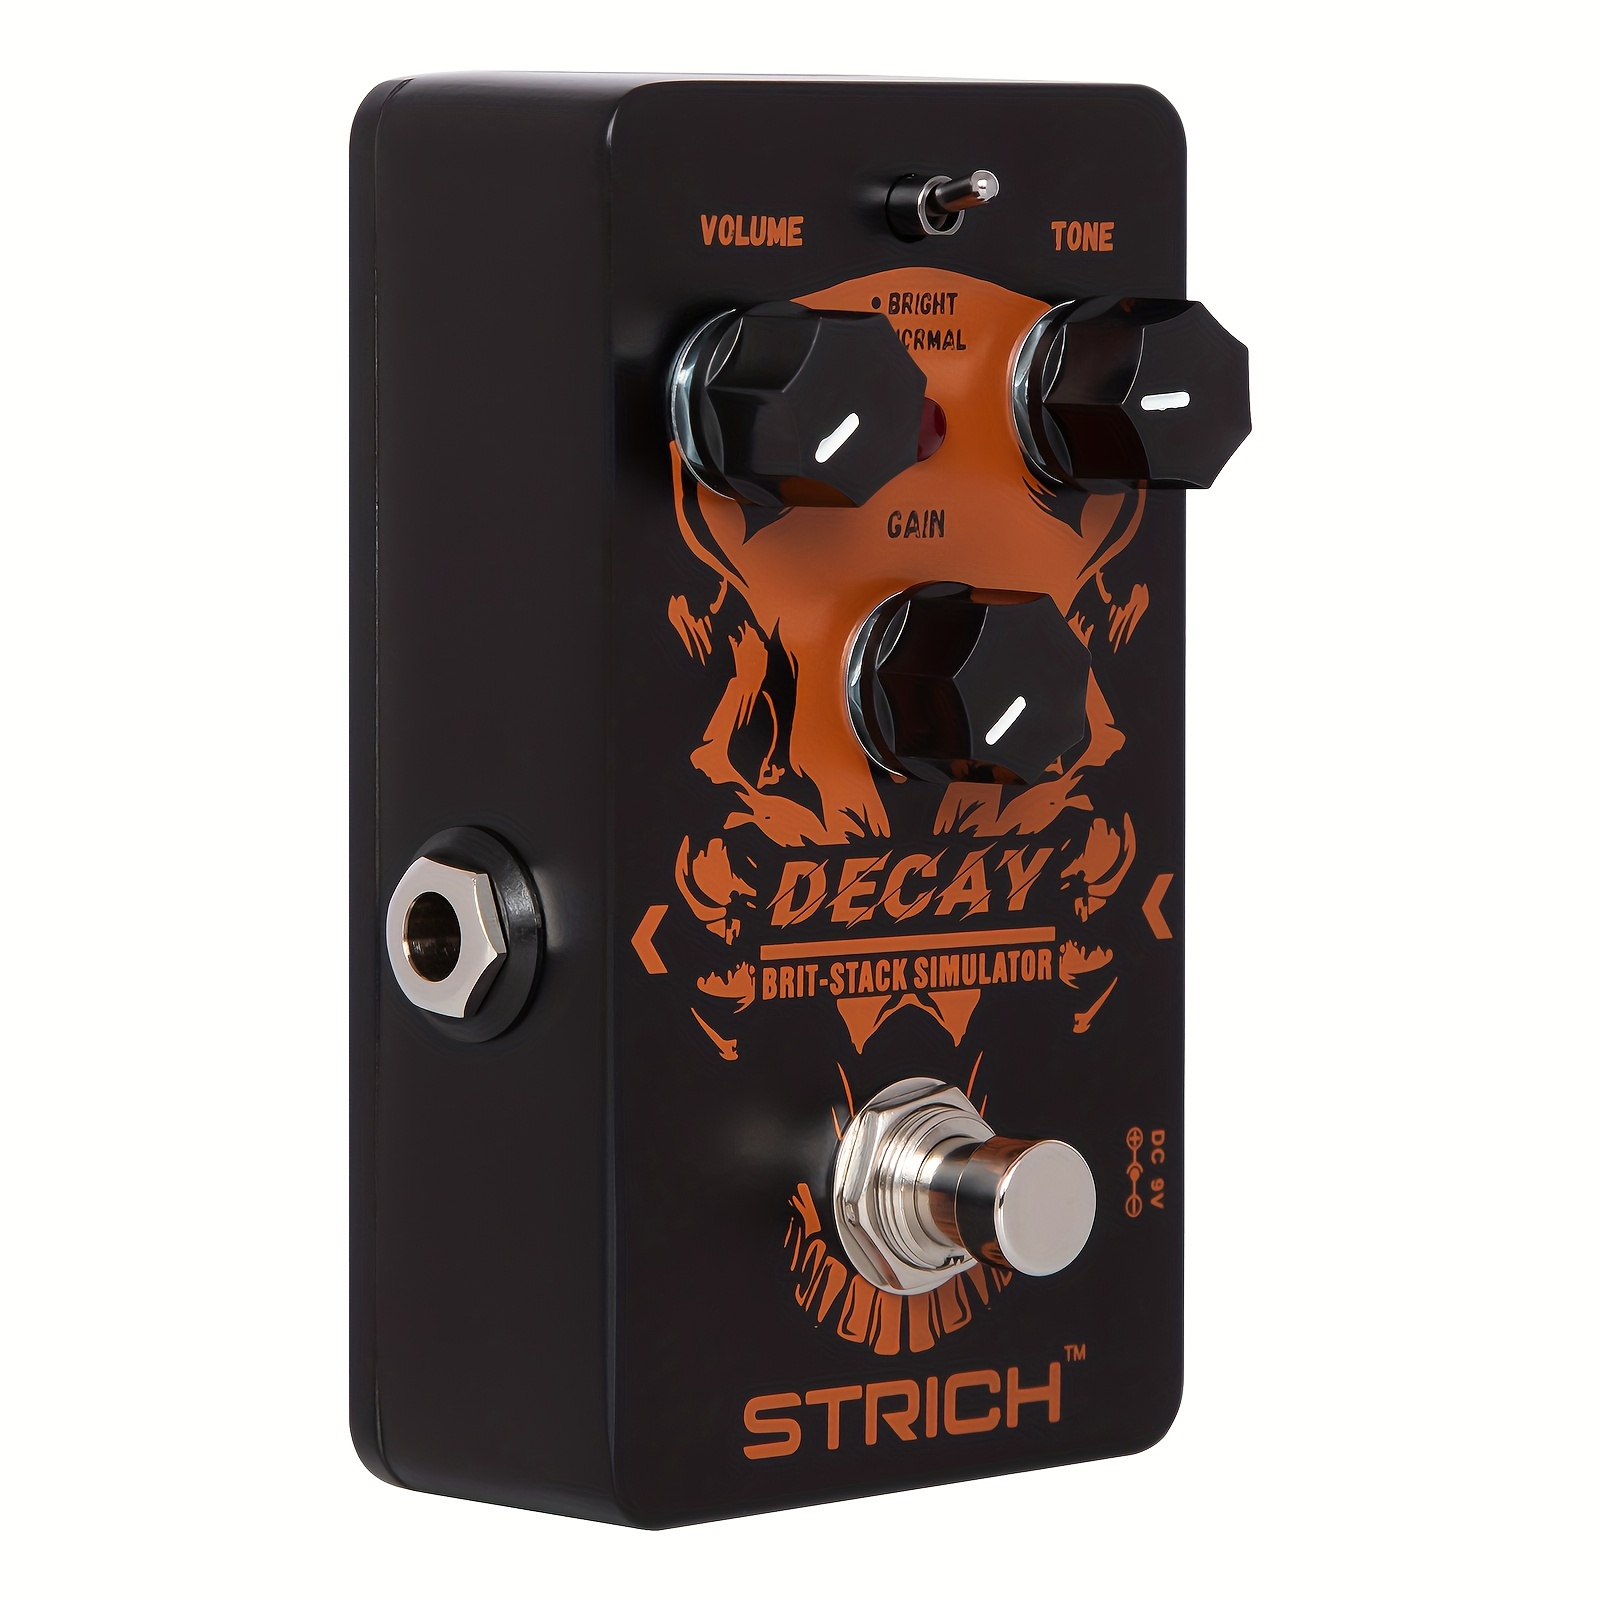 

Strich Decay Distortion Guitar Pedal, Distortion 2 Modes Bright, Normal, Tight, Classic 80s Metal/nu, True Bypass For Electric Guitar, Black And Red